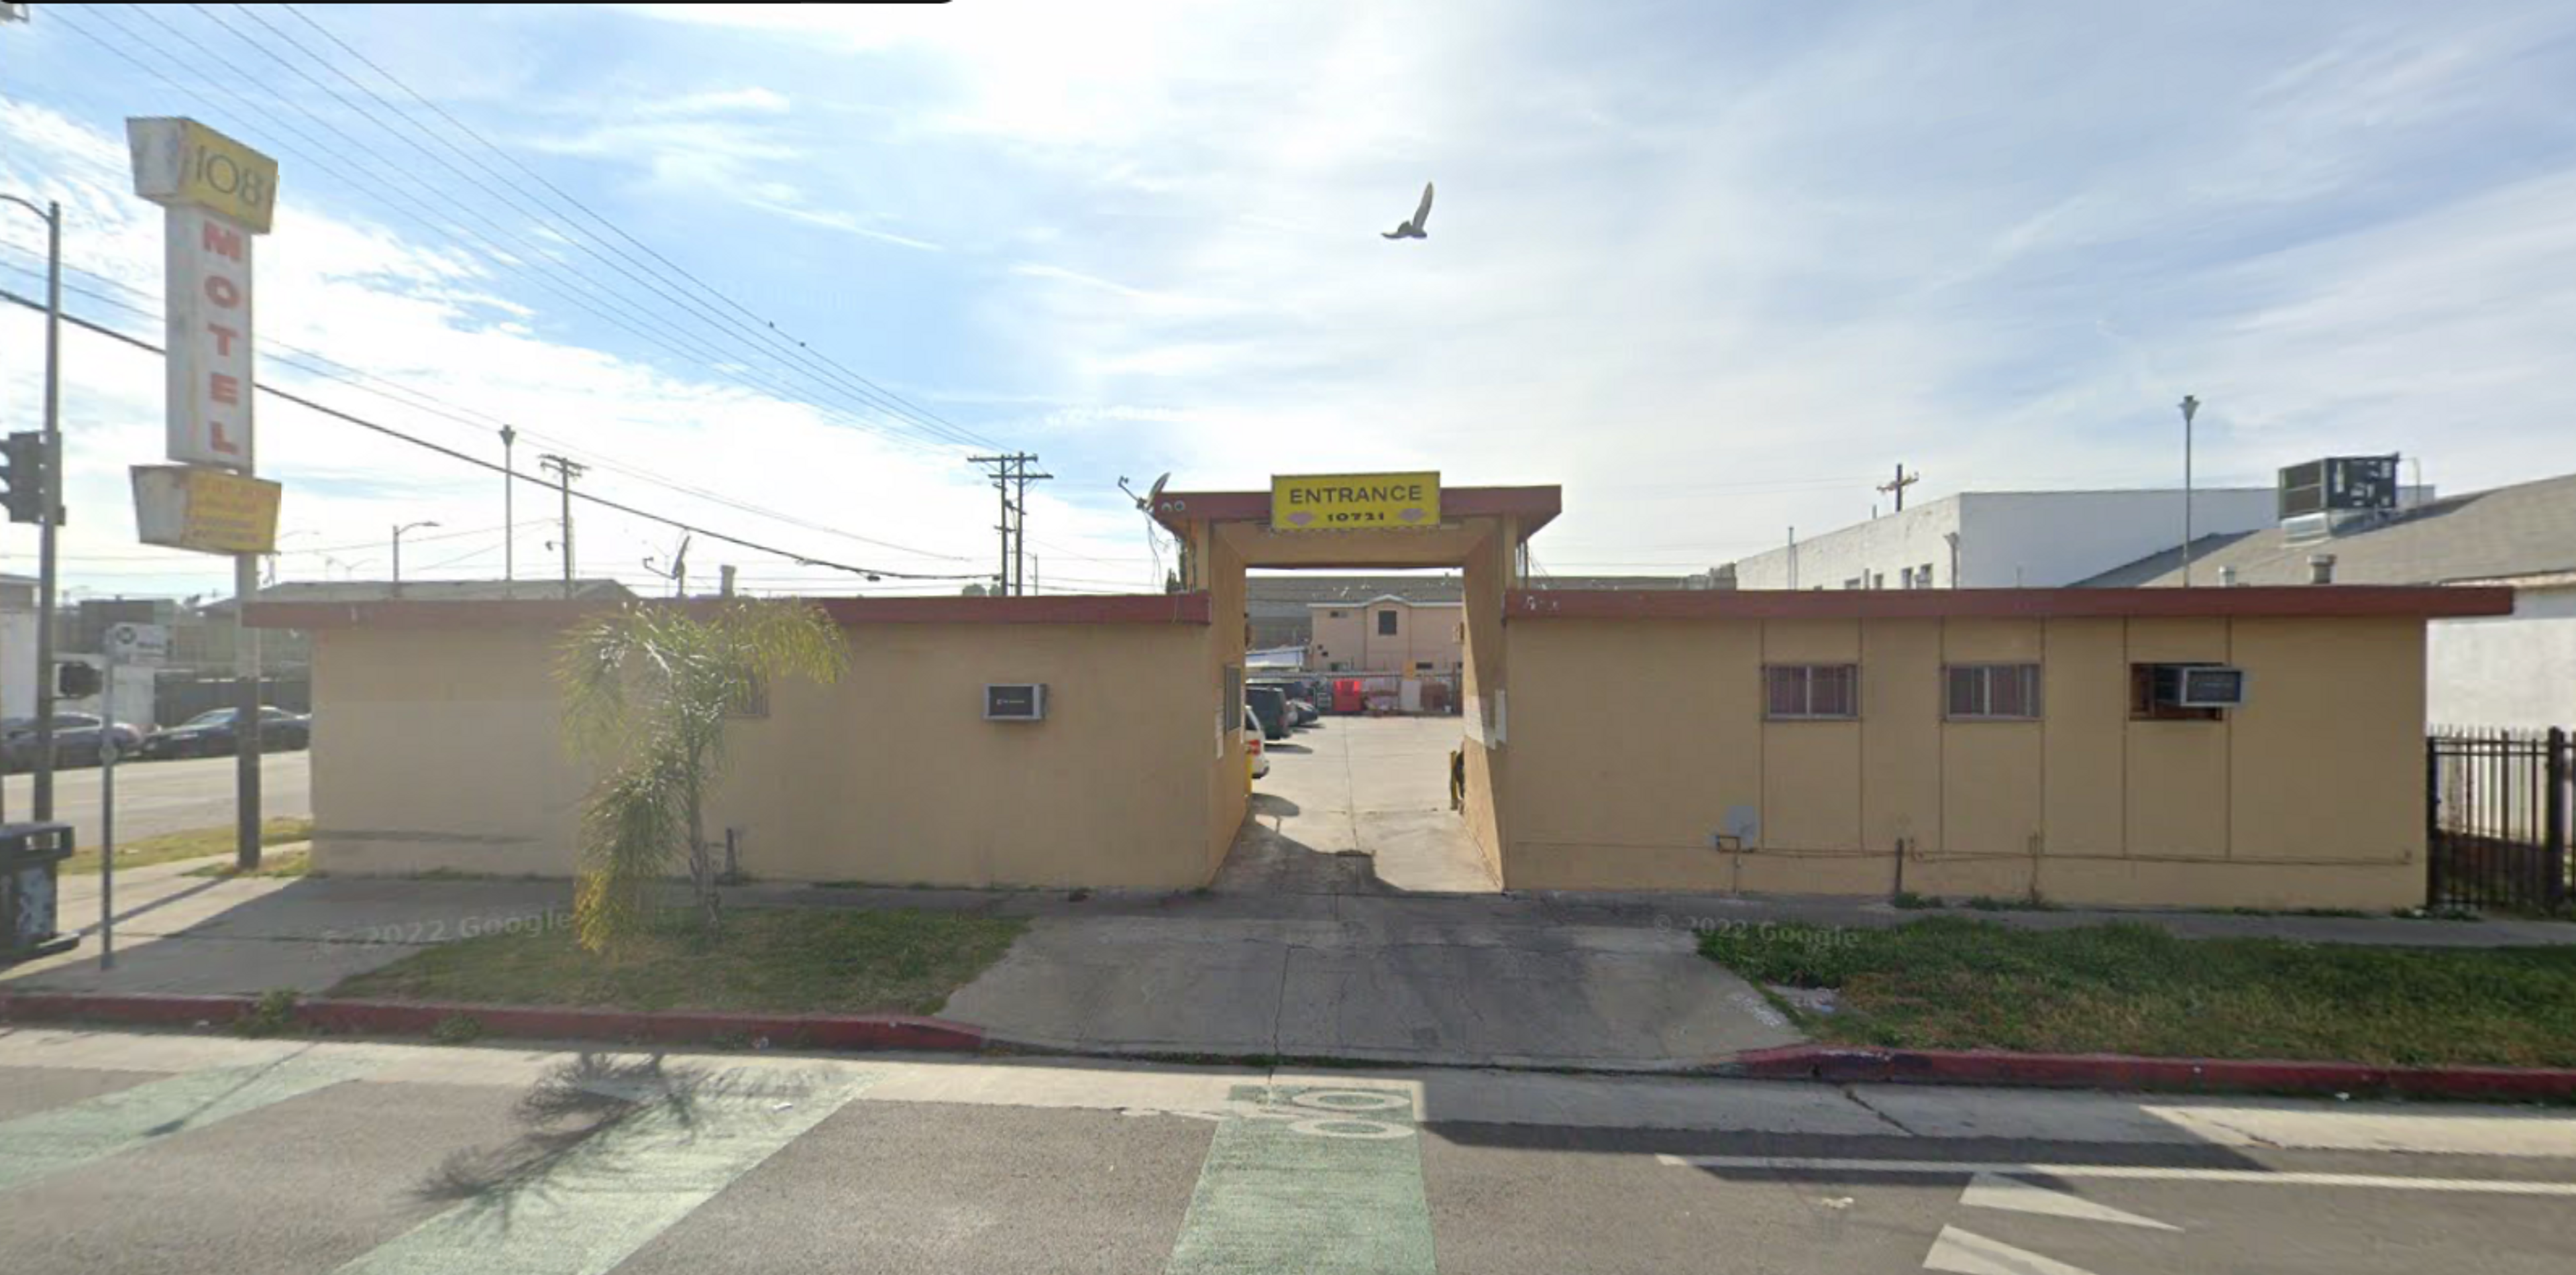 Image of the 108 Motel, a beige one-story motel in poor condition, via Google Maps.